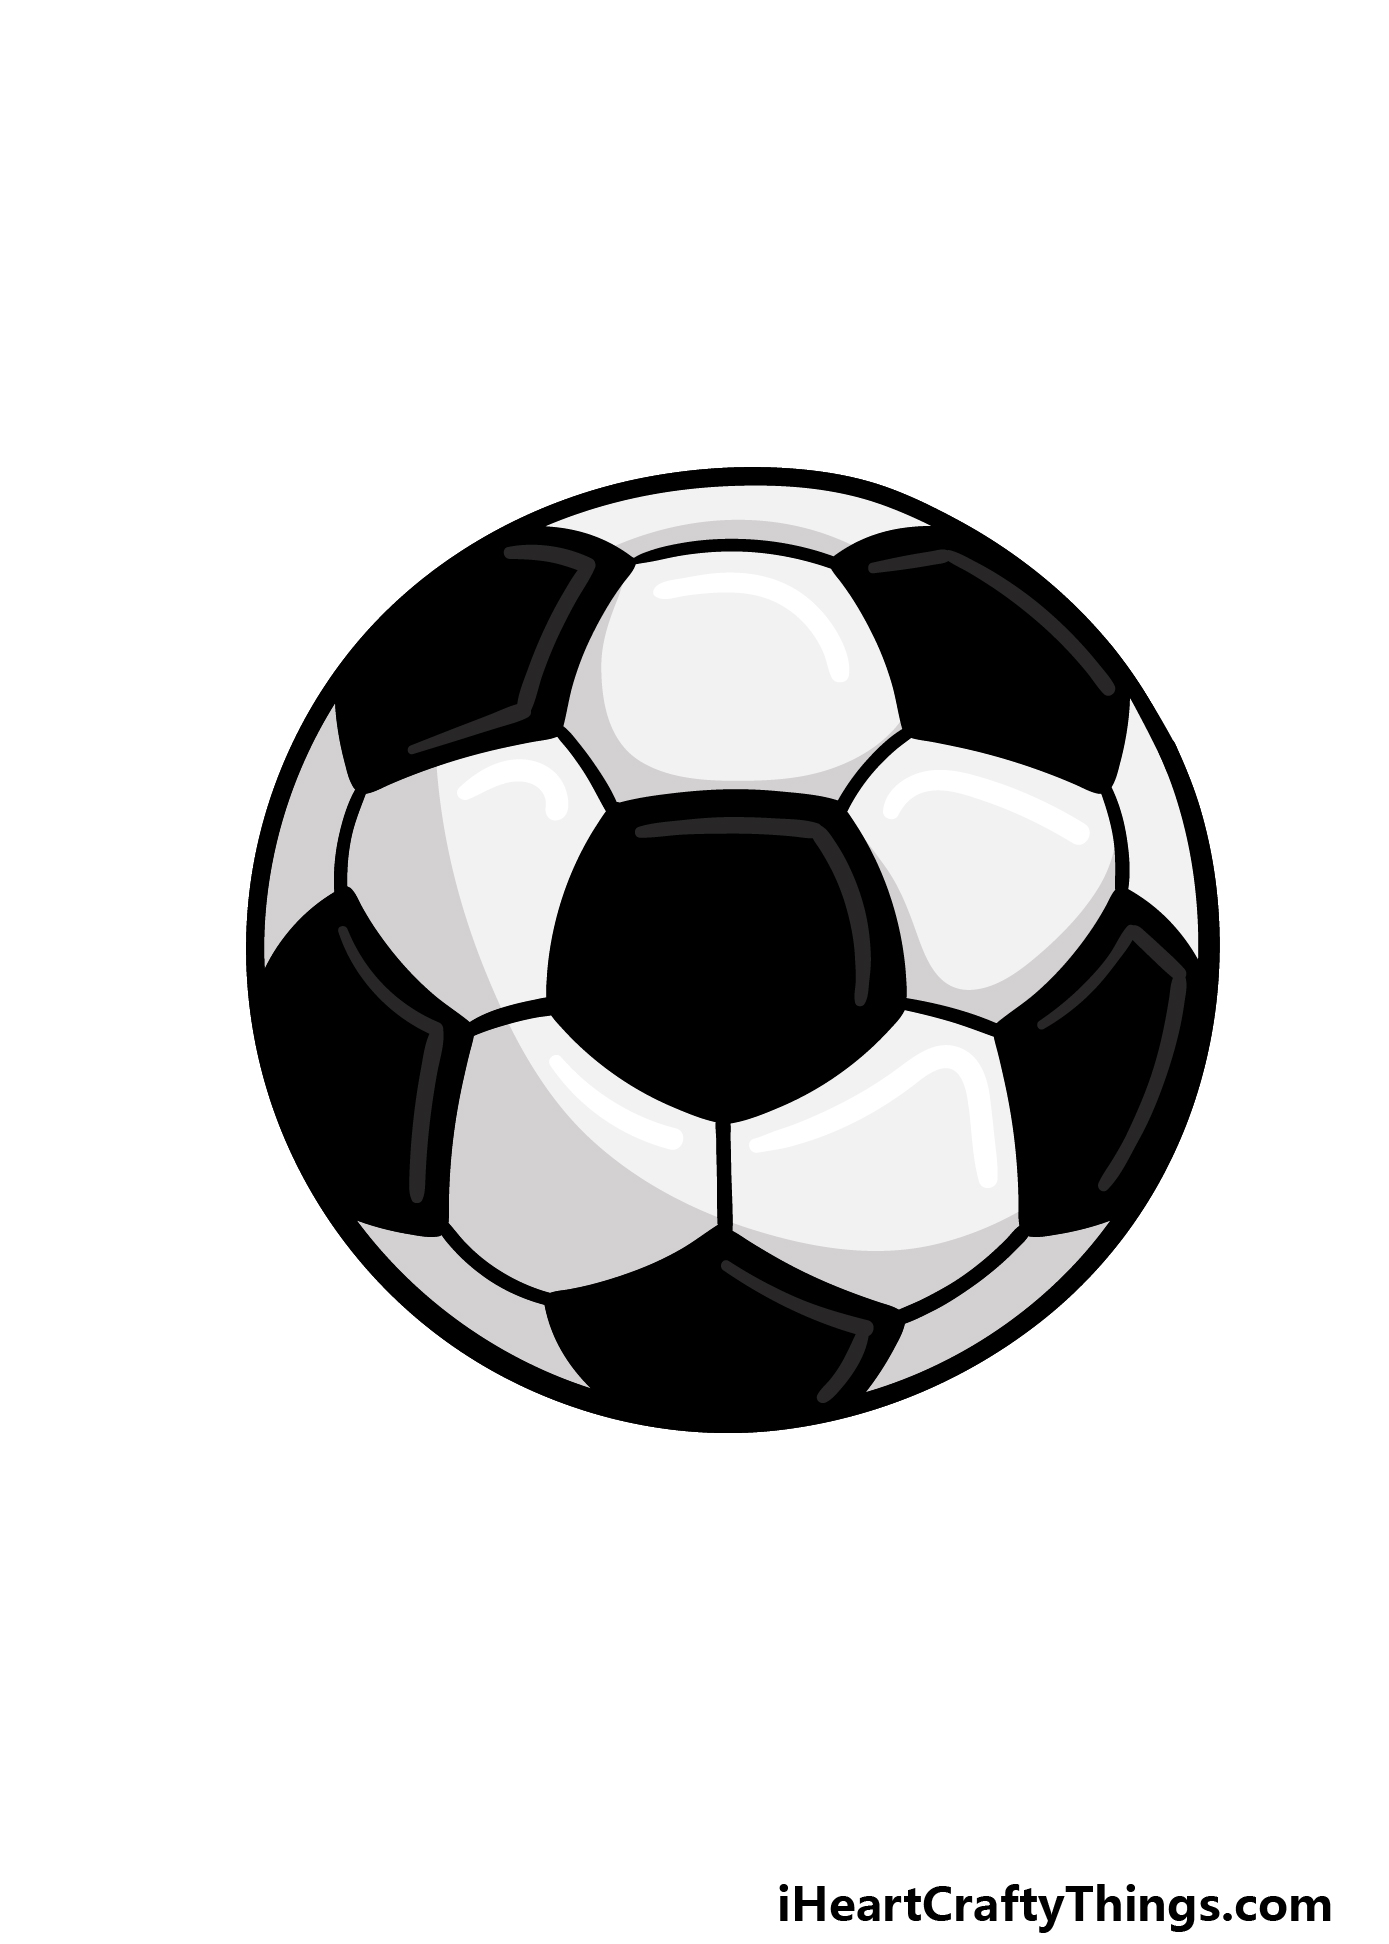 Cartoon Soccer Ball Drawing - How To Draw A Cartoon Soccer Ball Step By Step